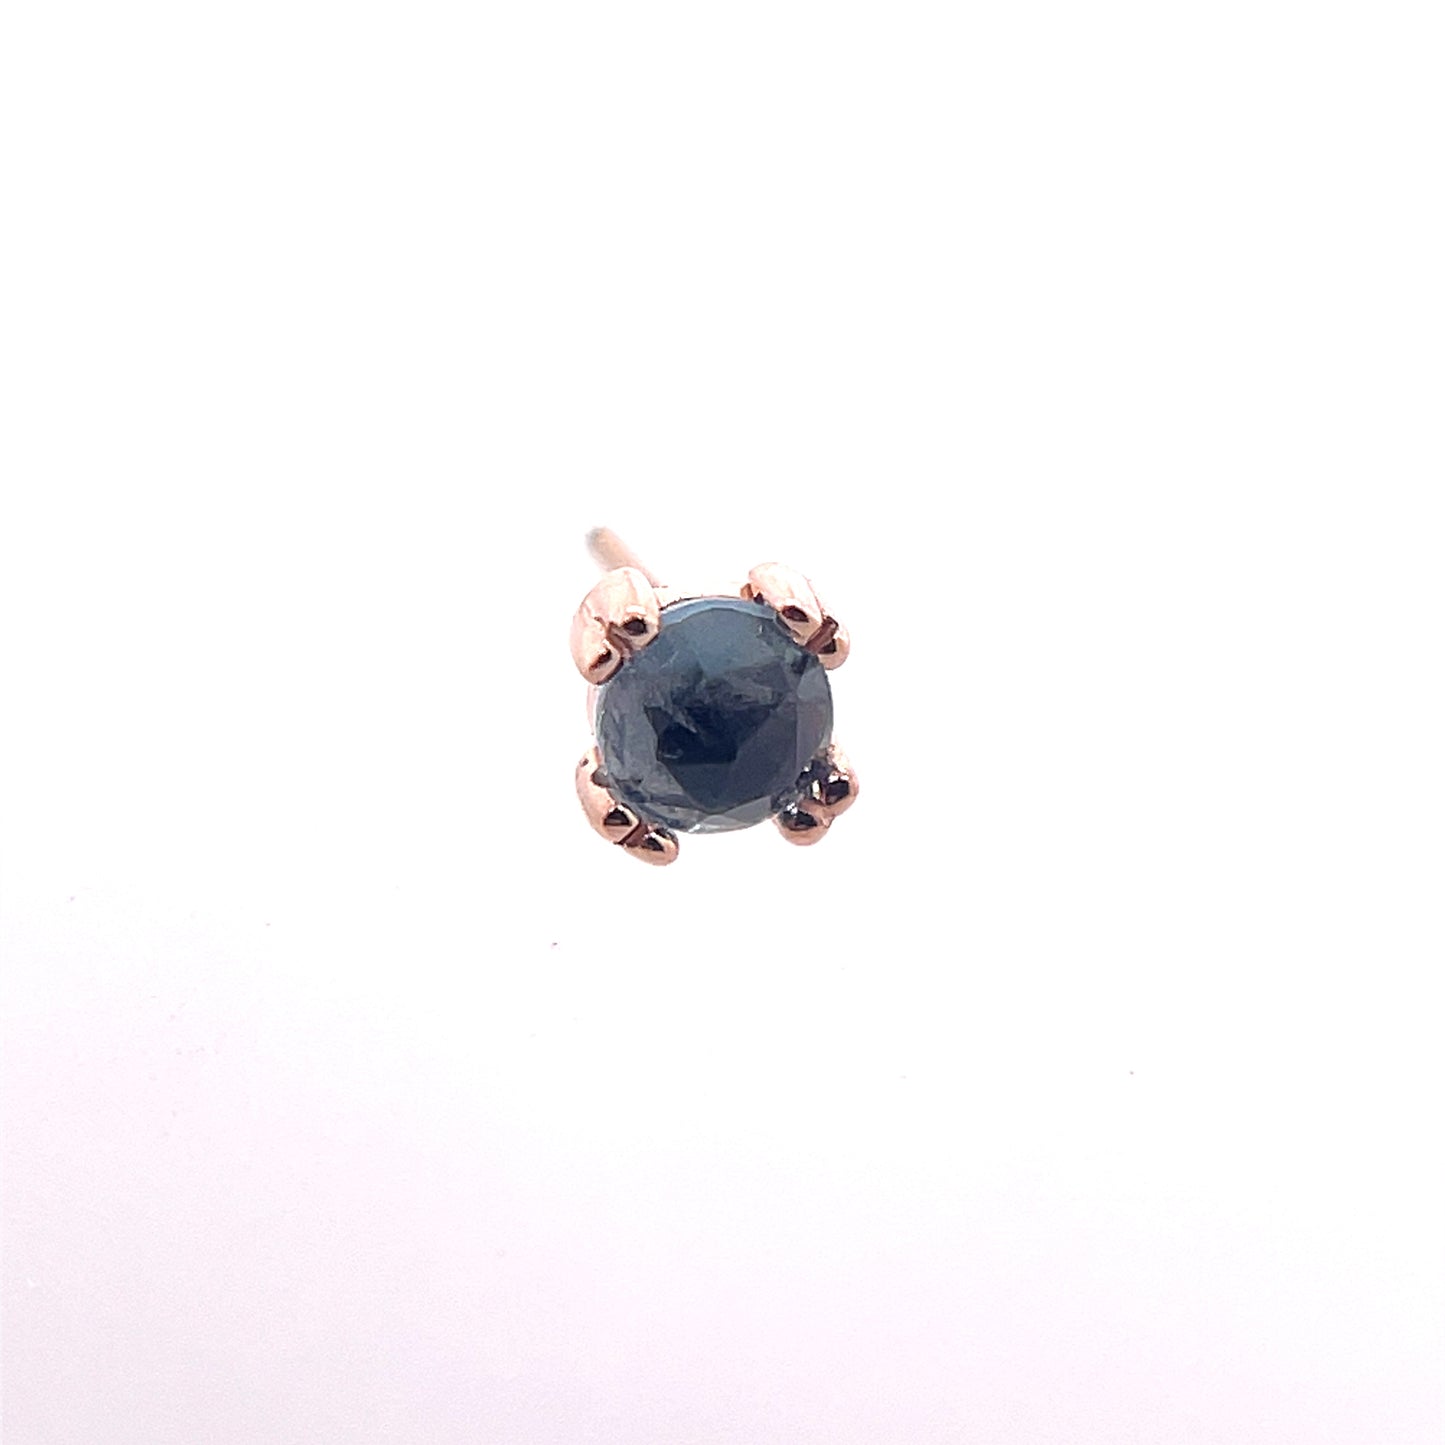 2.5mm Round Cab Prong